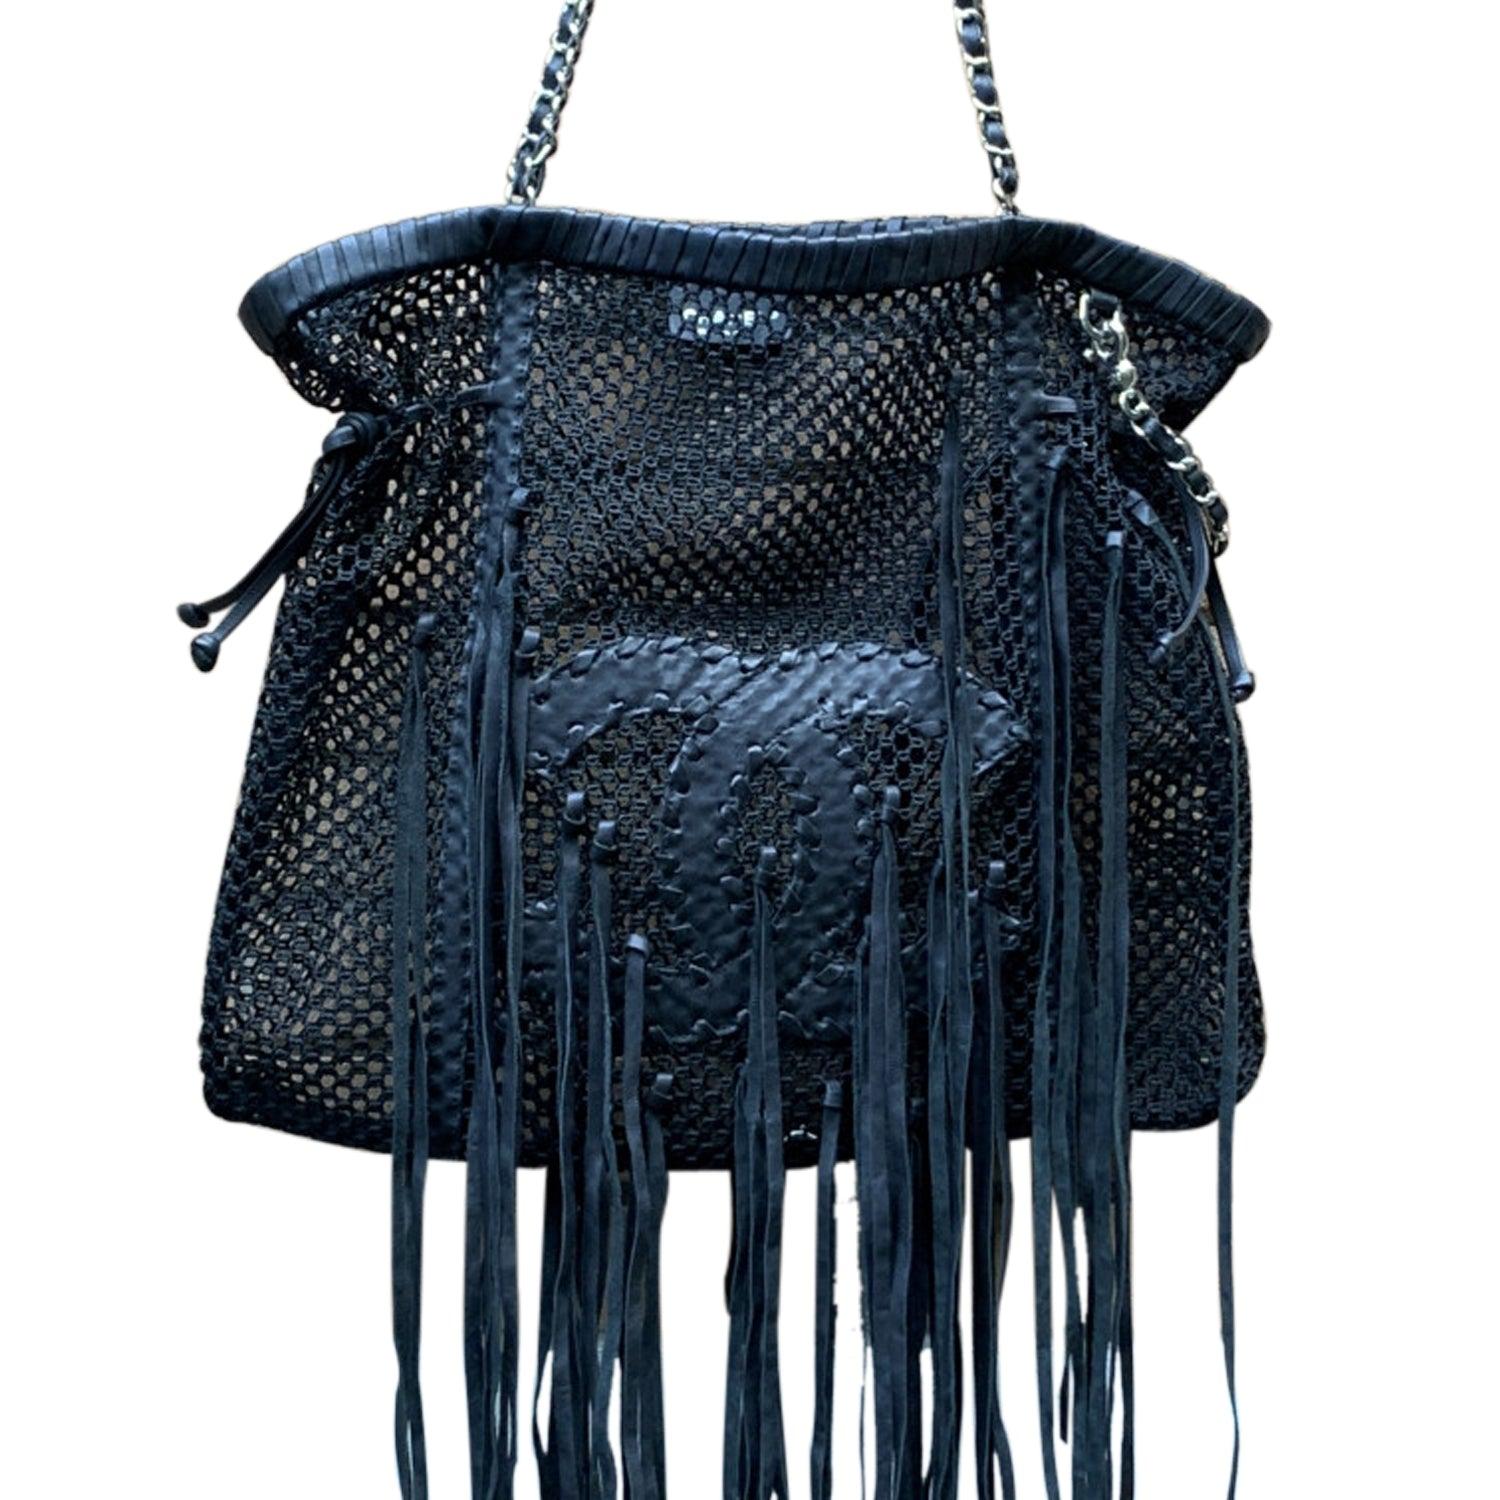 Chanel Limited Edition Resort 2011 Black Fringe Mesh Tote Bag In Excellent Condition For Sale In Rome, Rome